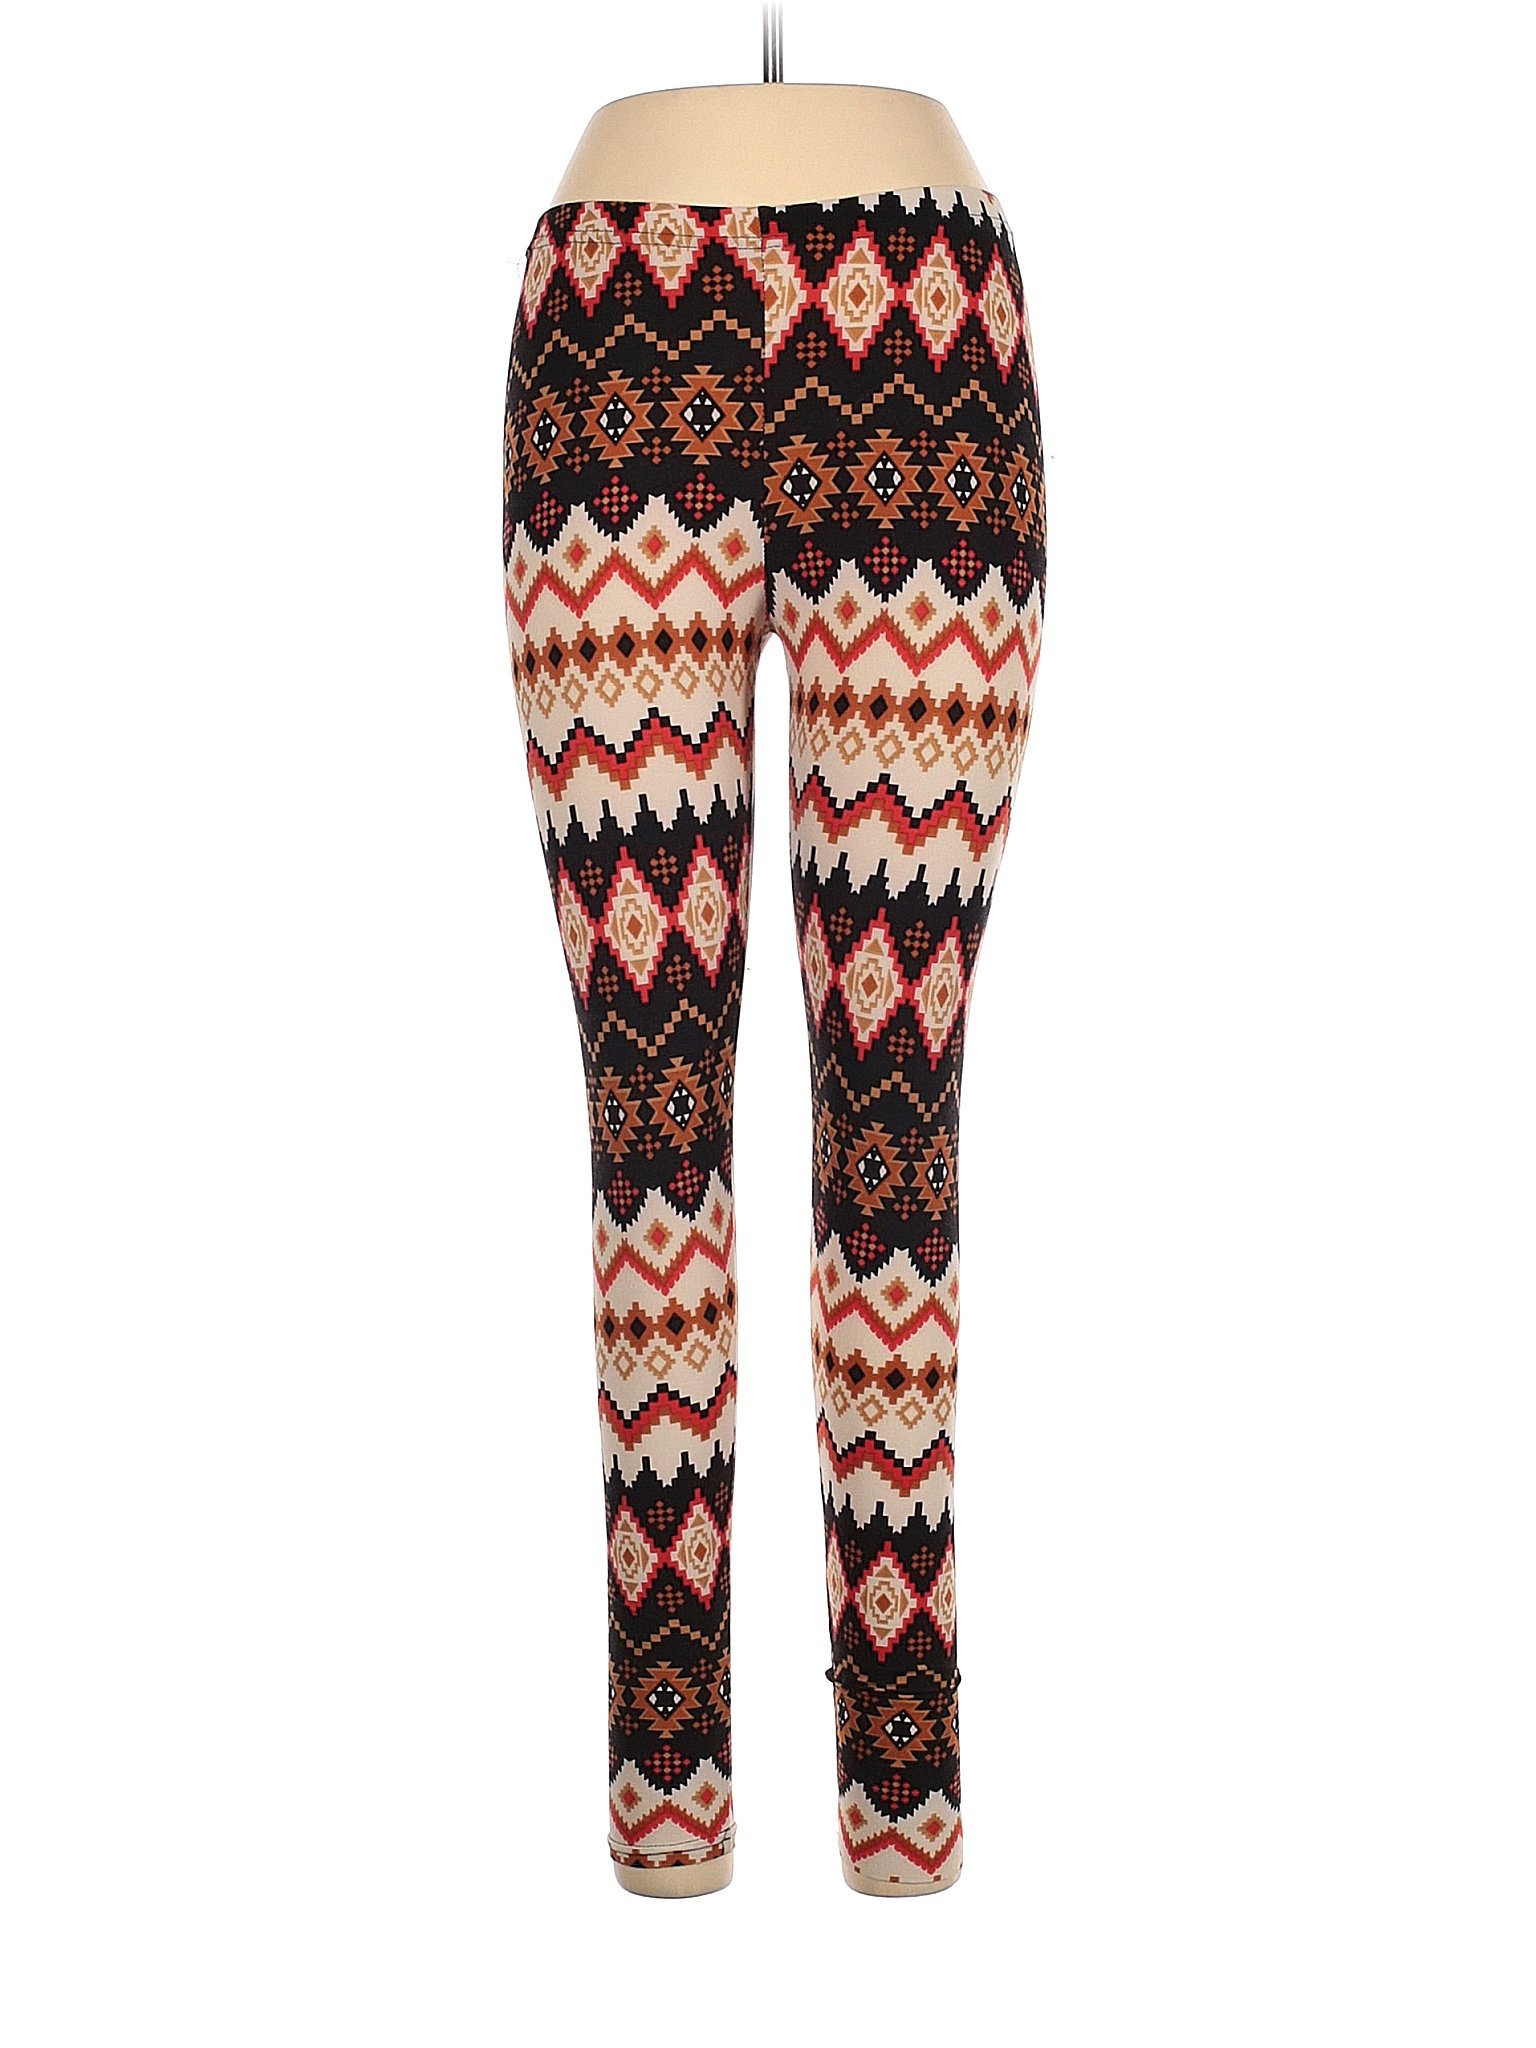 eye candy leggings, eye candy leggings Suppliers and Manufacturers